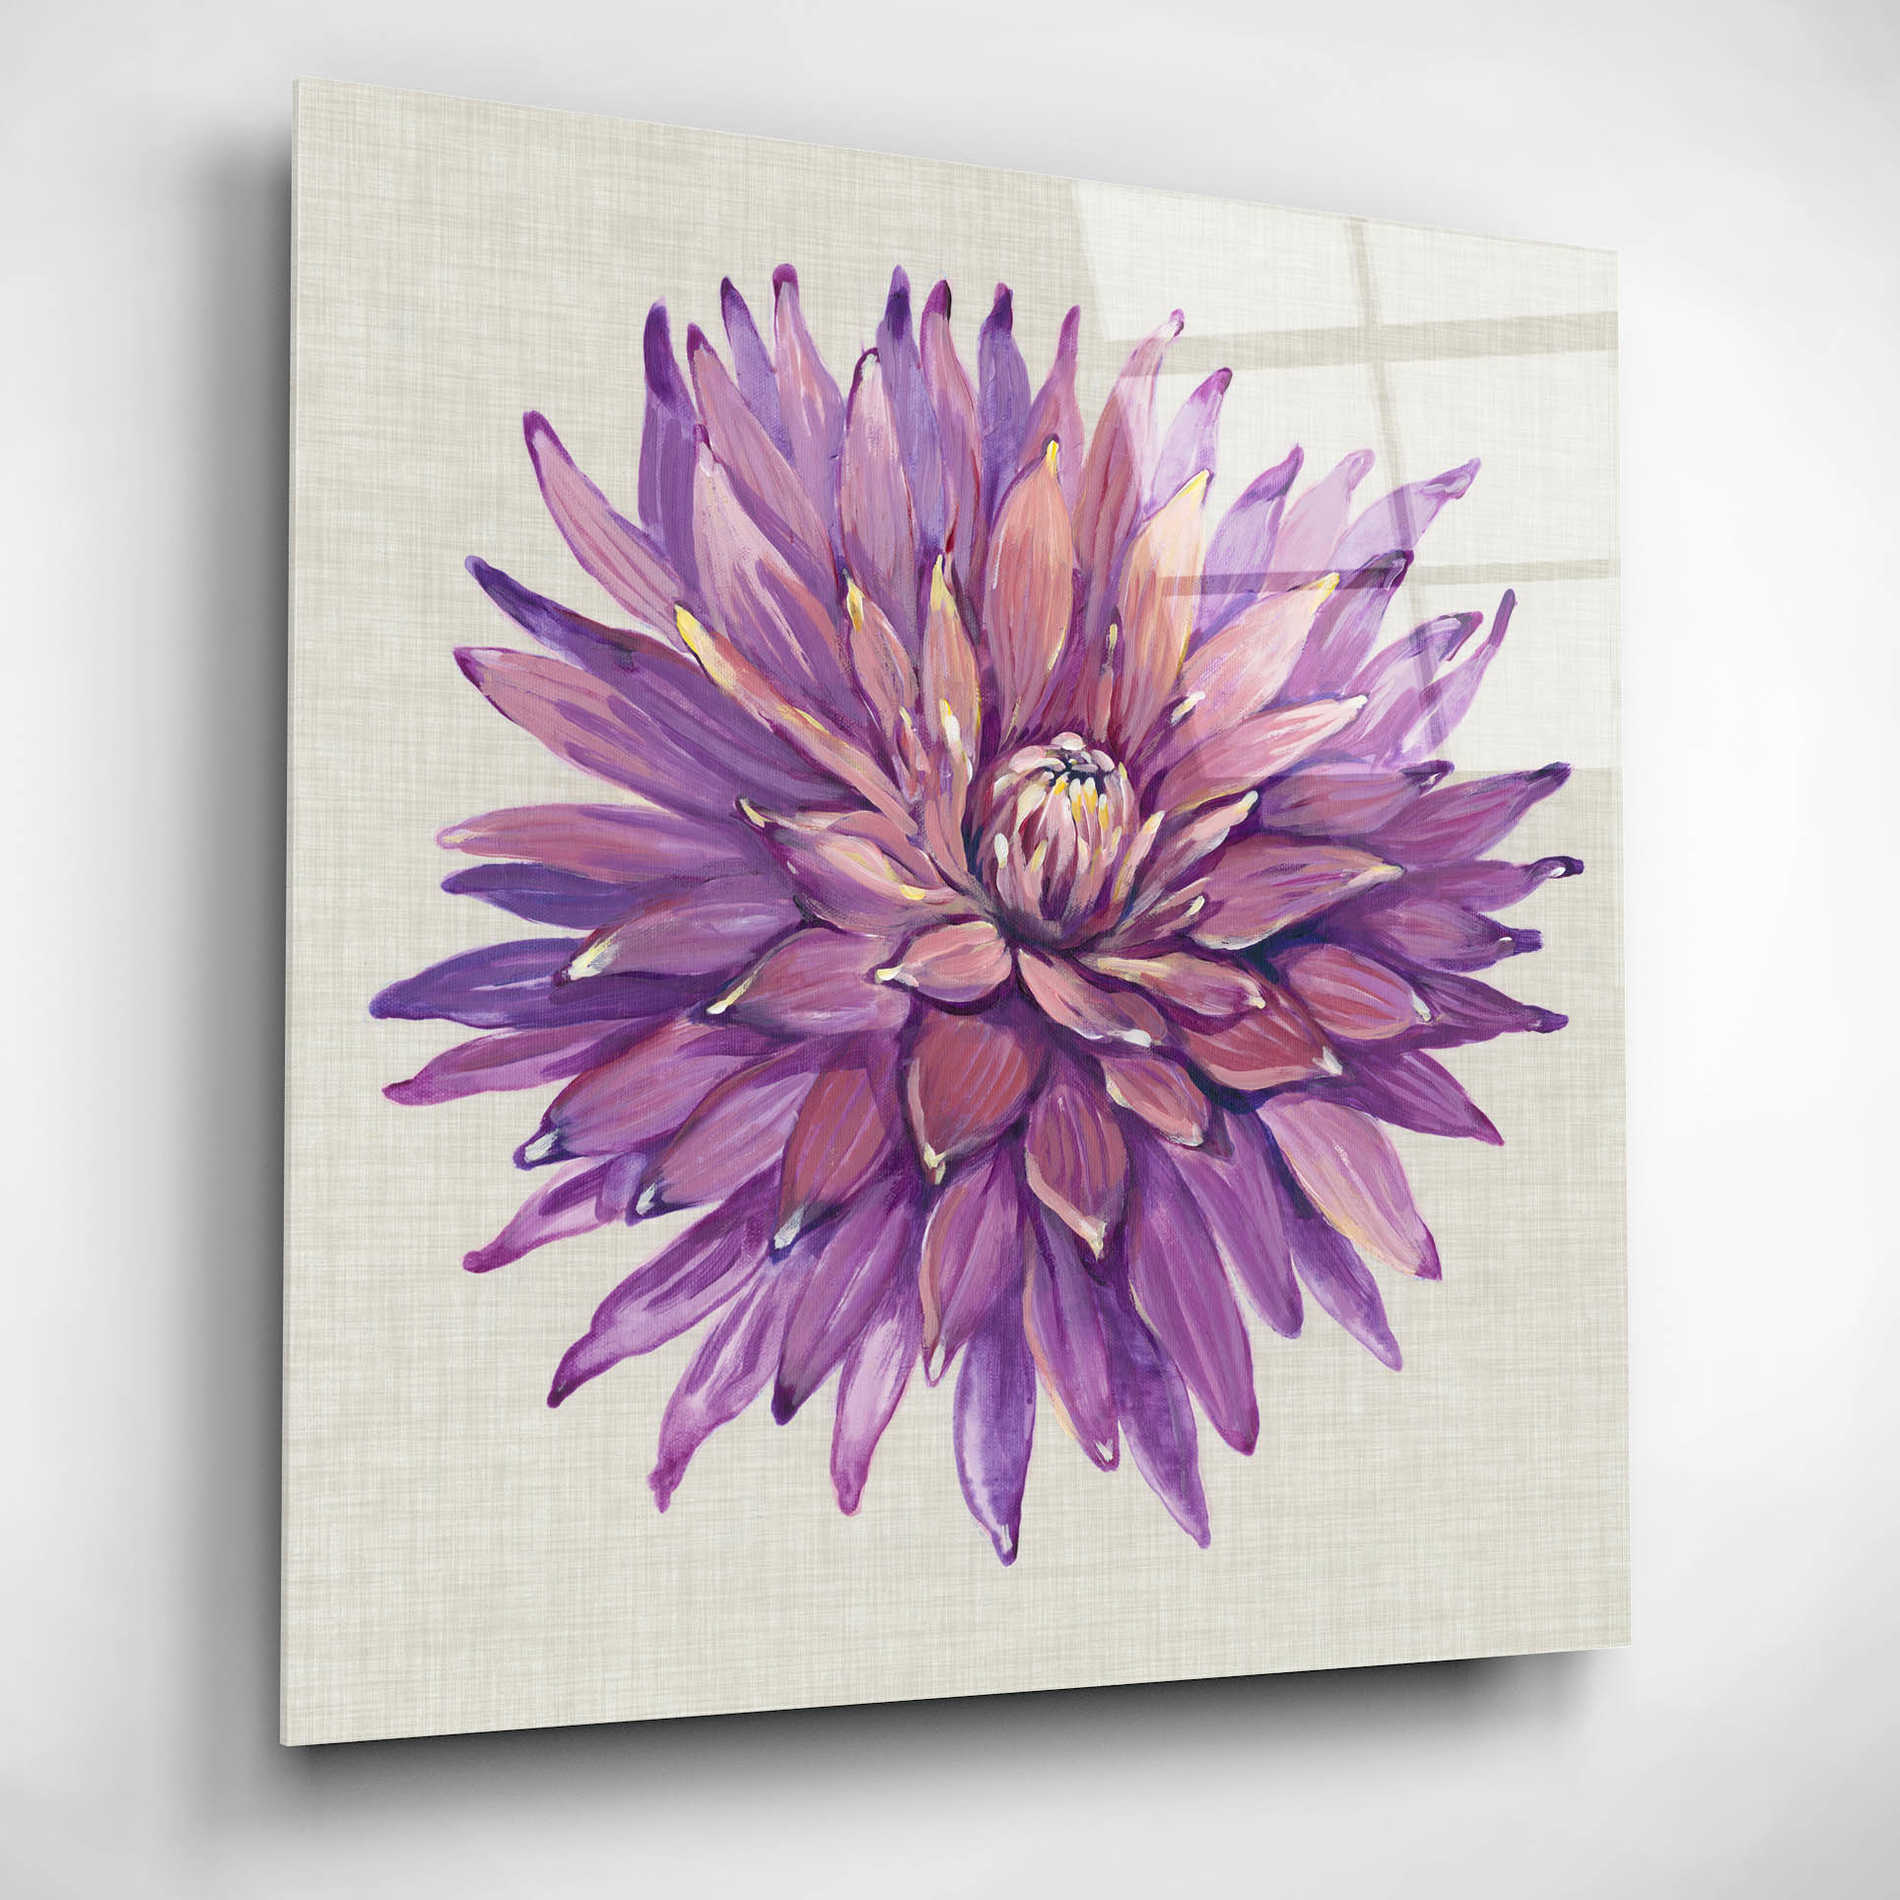 Epic Art 'Floral Portrait on Linen II' by Tim O'Toole, Acrylic Glass Wall Art,12x12